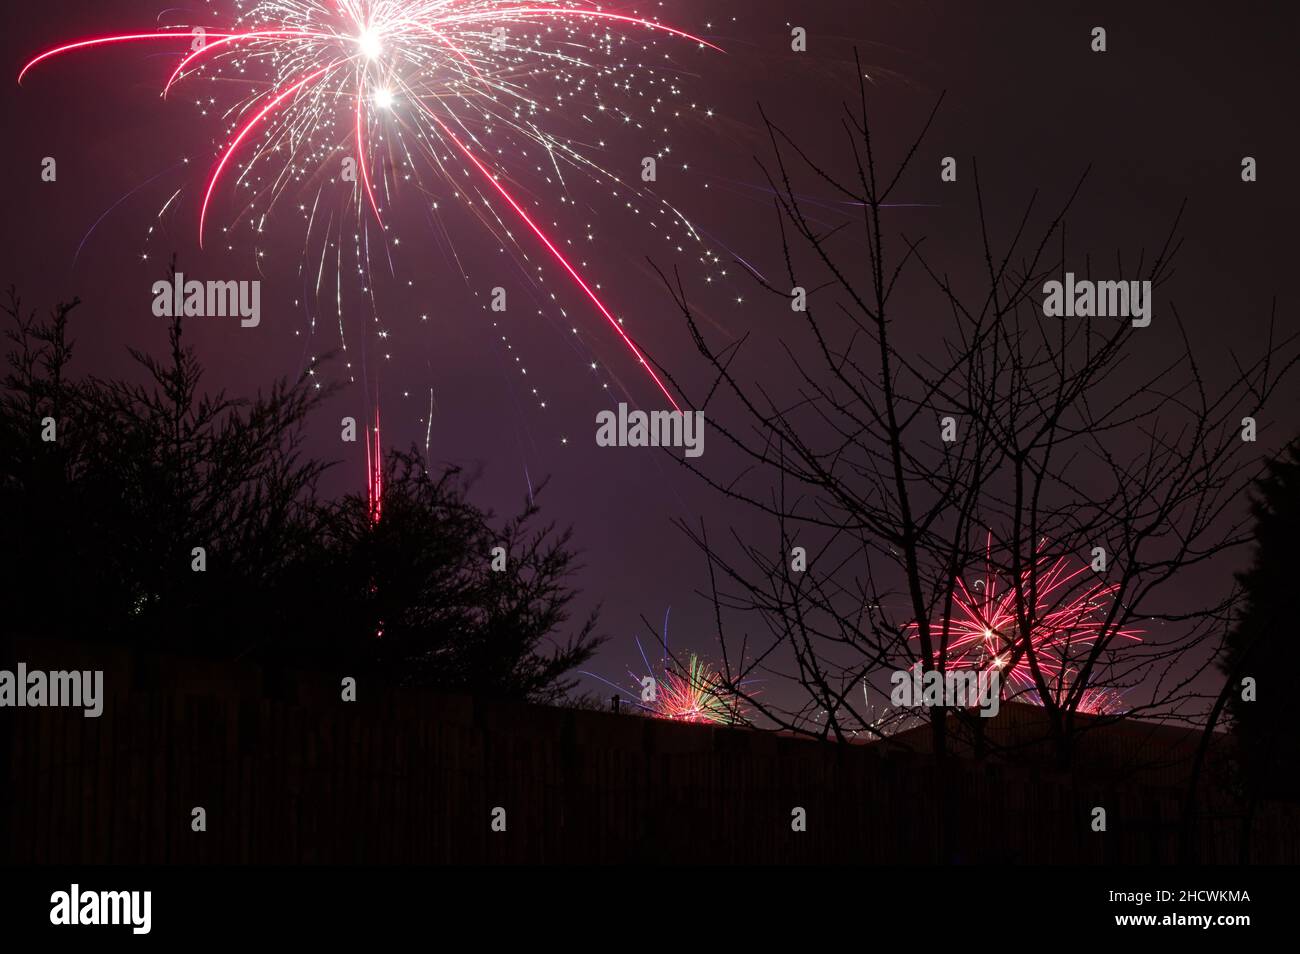 View from a garden of colourful fireworks in the night sky celebrating the new year Stock Photo